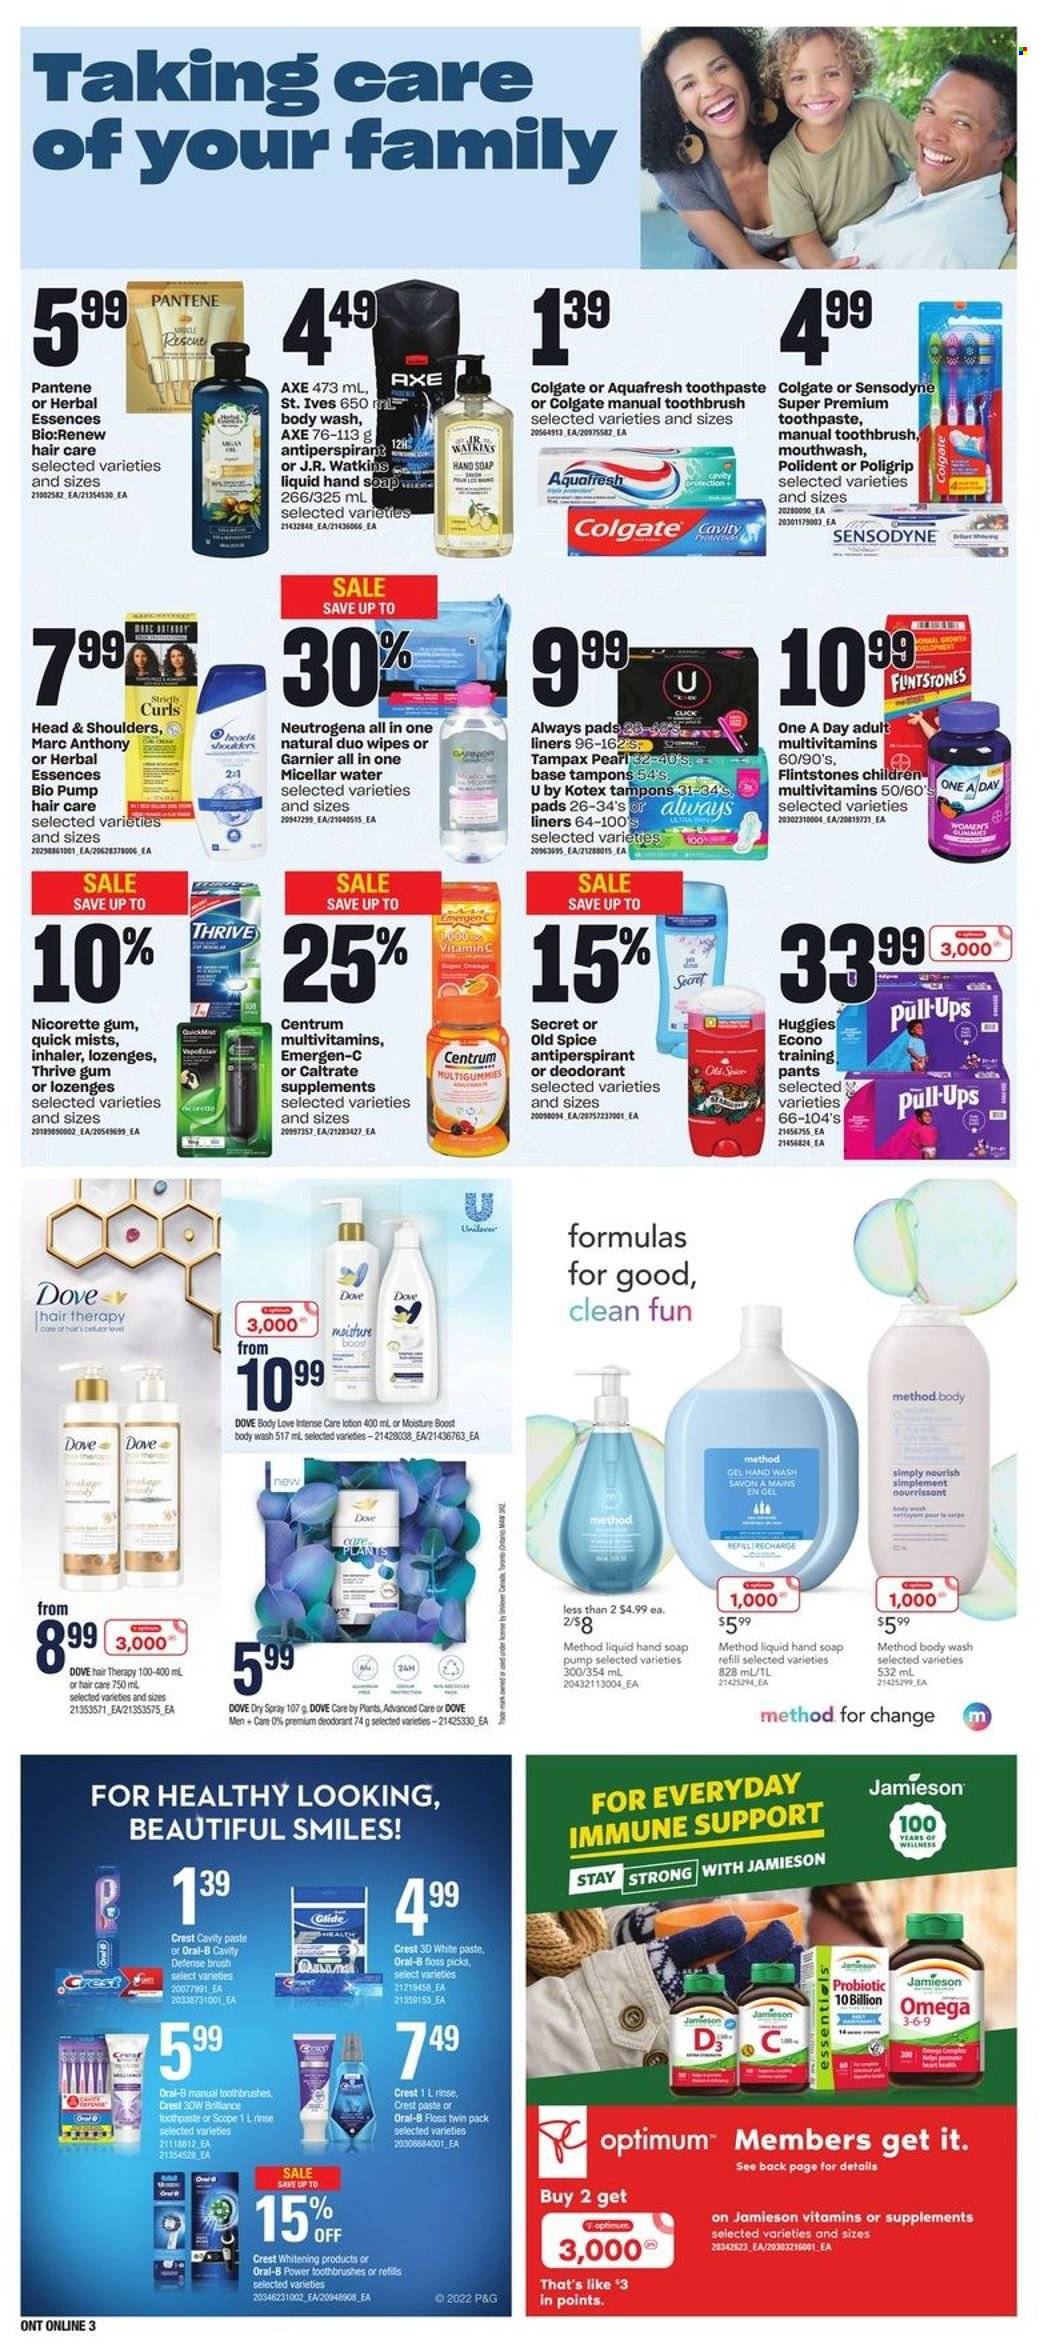 thumbnail - Loblaws Flyer - December 01, 2022 - December 07, 2022 - Sales products - Dove, spice, Boost, wipes, pants, baby pants, Always liners, body wash, hand soap, hand wash, soap, toothbrush, toothpaste, mouthwash, Polident, Crest, Always pads, Kotex, tampons, micellar water, Herbal Essences, body lotion, anti-perspirant, Axe, Optimum, multivitamin, Nicorette, vitamin c, Omega-3, Emergen-C, Nicorette Gum, Centrum, Colgate, Garnier, Neutrogena, Tampax, Head & Shoulders, Huggies, Pantene, Old Spice, Oral-B, Sensodyne, deodorant. Page 7.